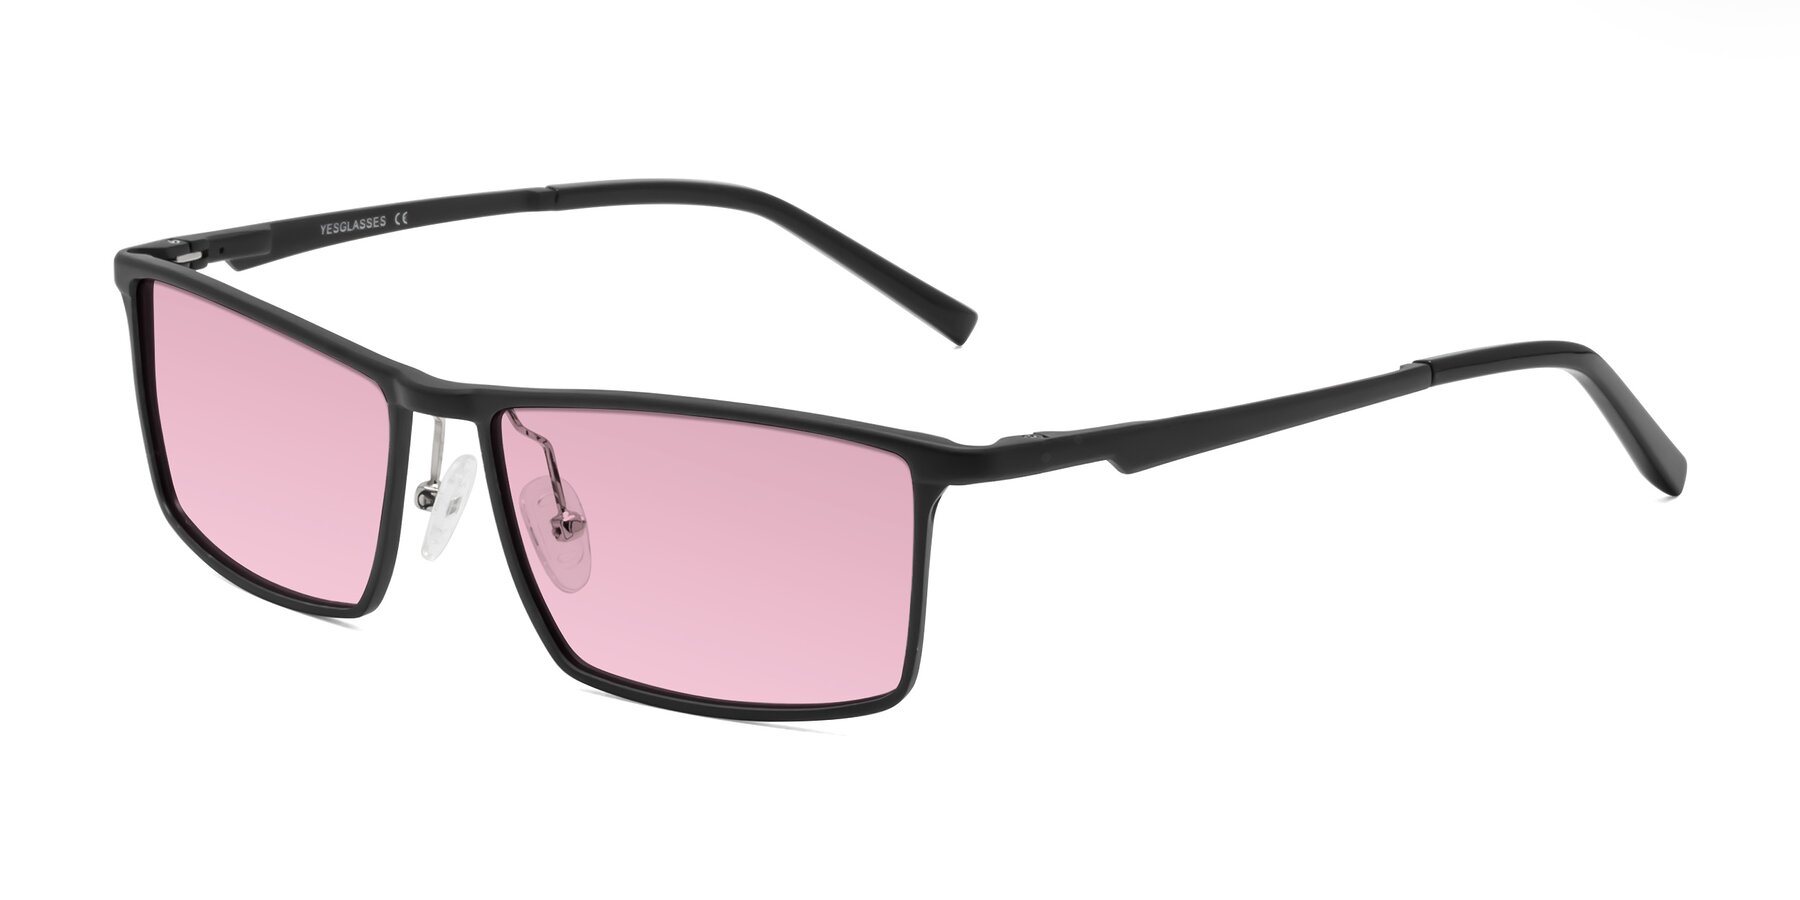 Angle of CX6330 in Black with Light Wine Tinted Lenses